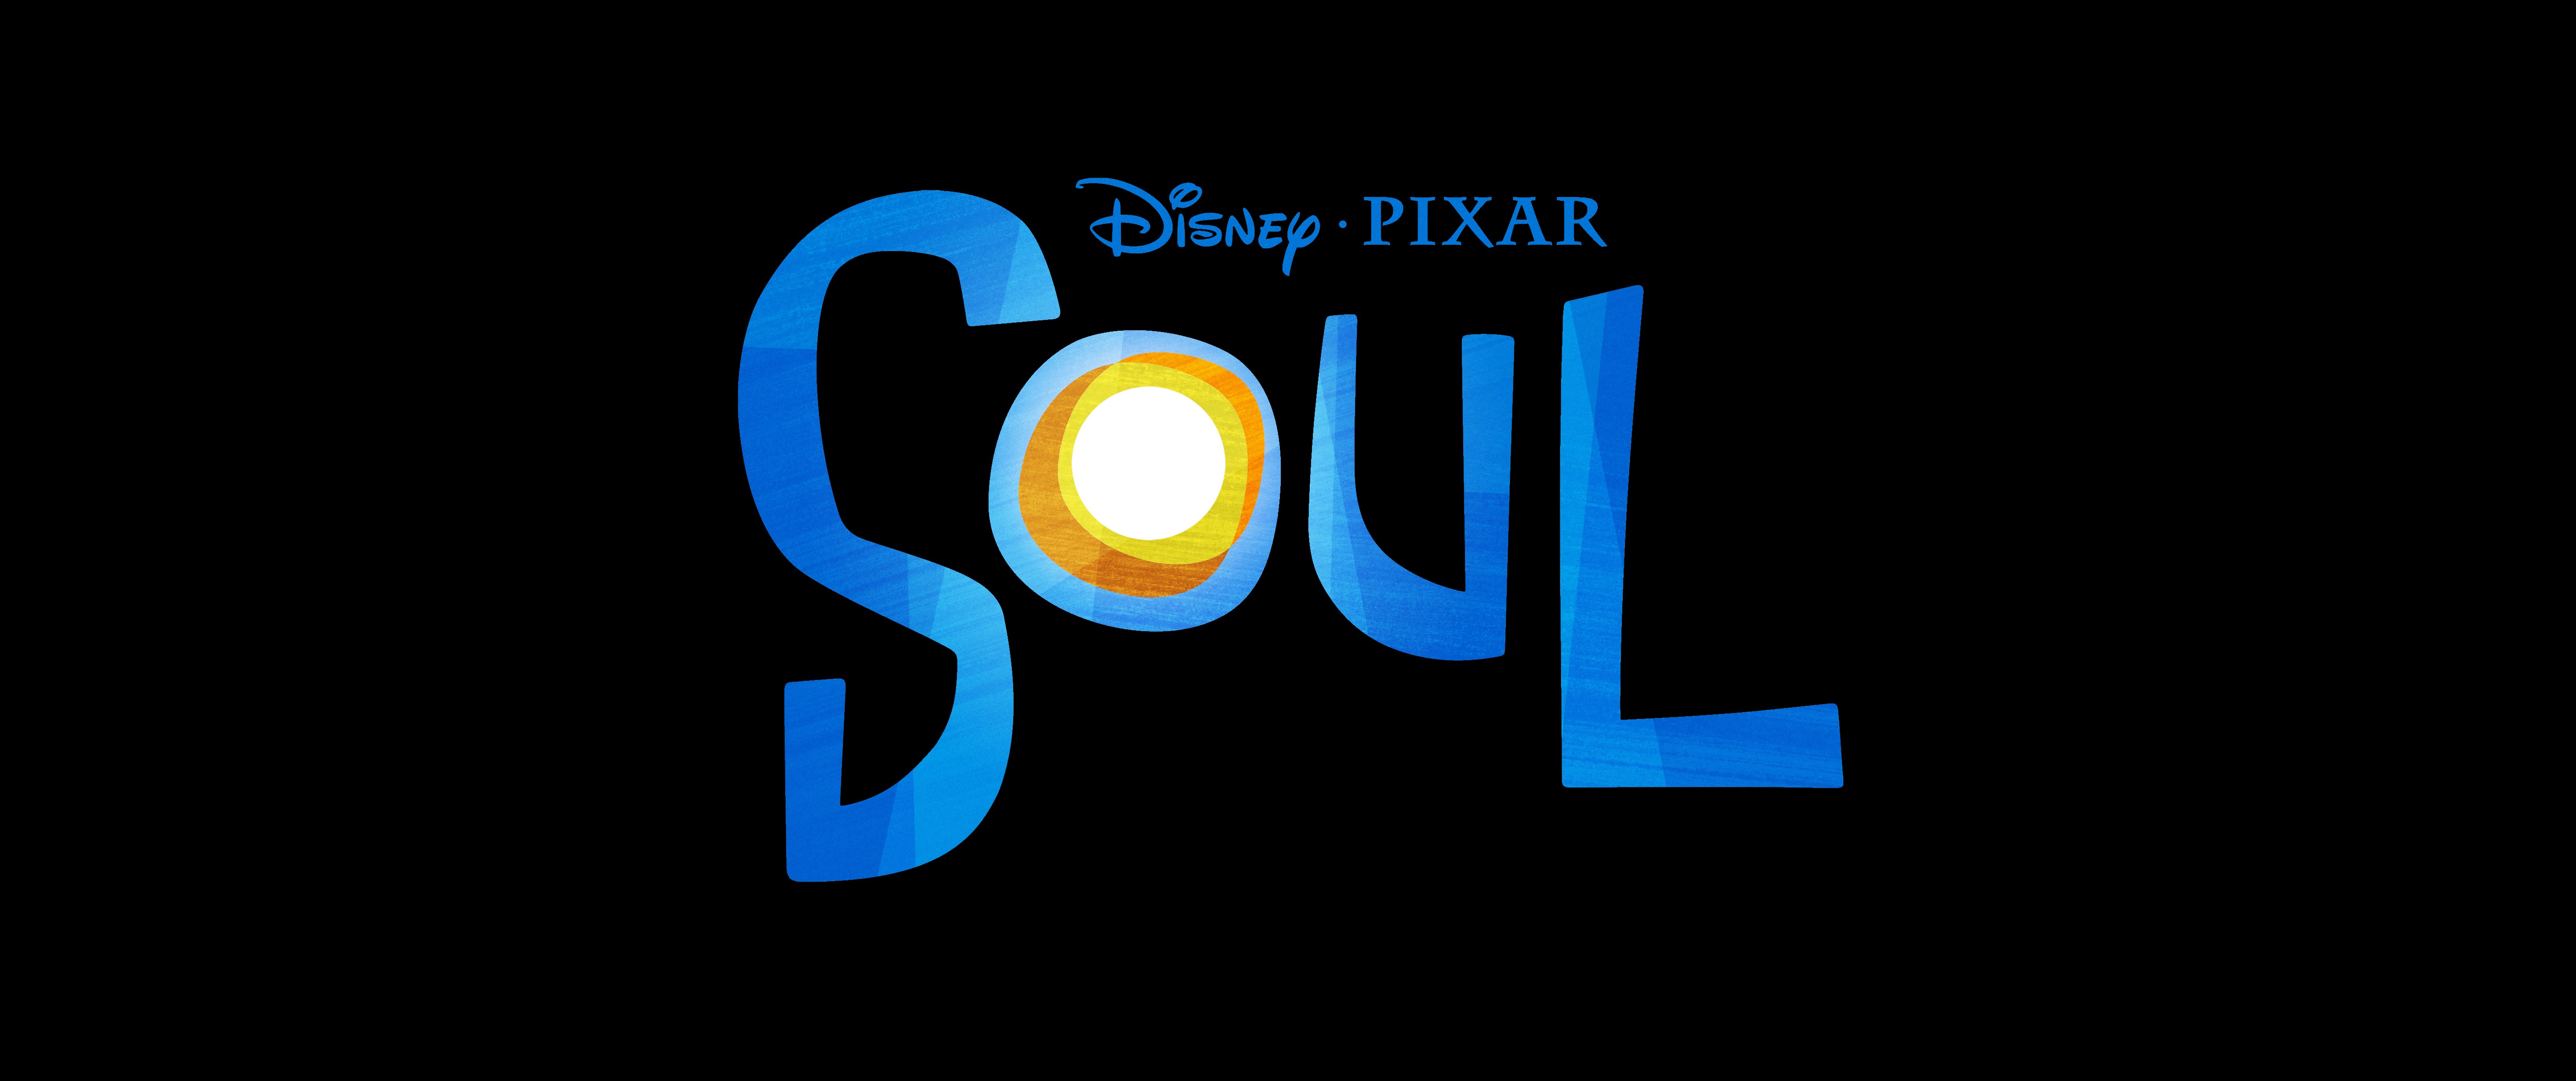 Movie Soul (2020) HD Wallpaper | Background Image